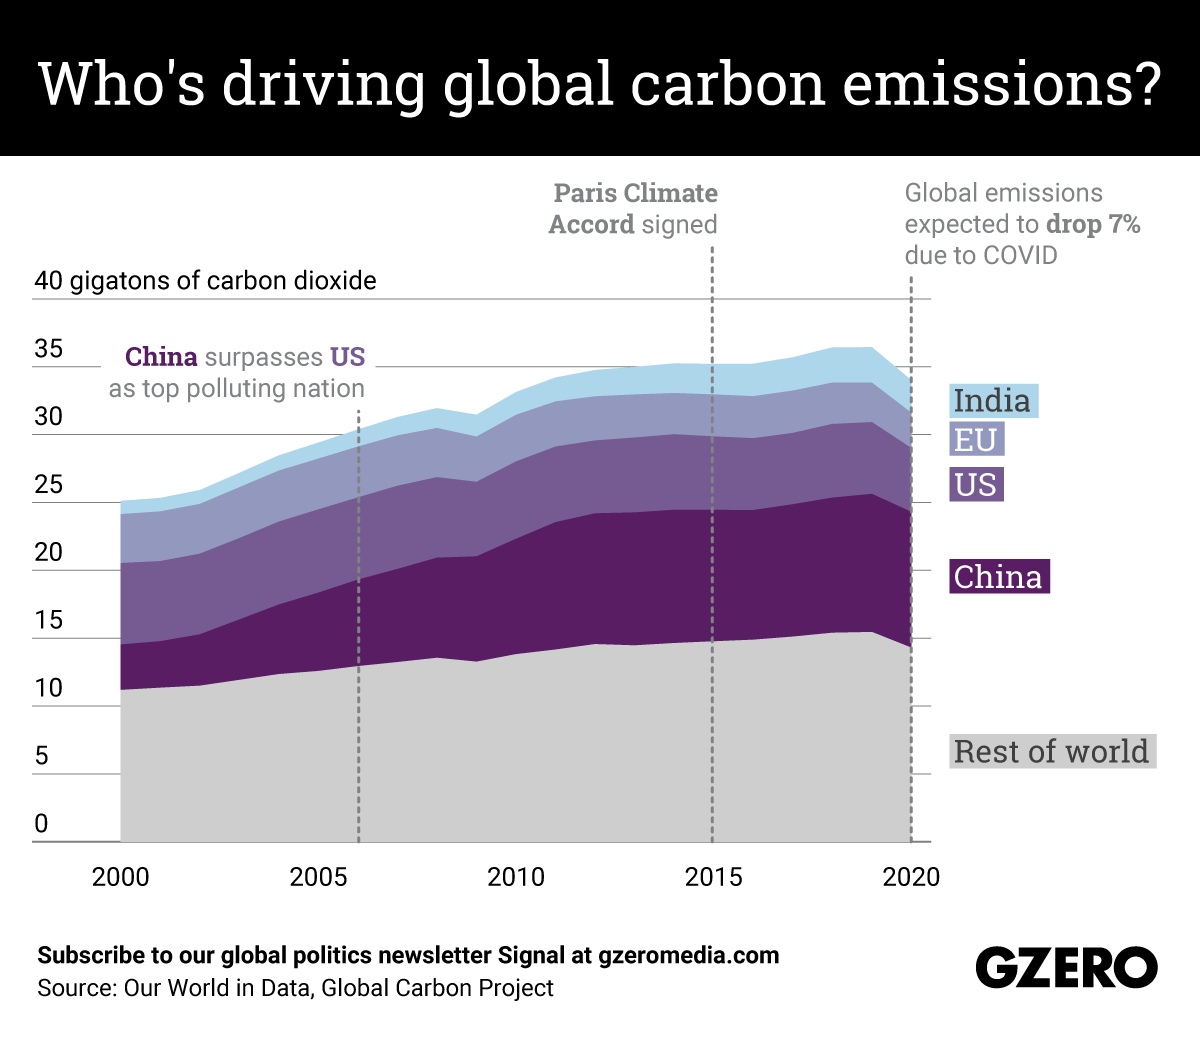 The Graphic Truth: Who's driving global carbon emissions?